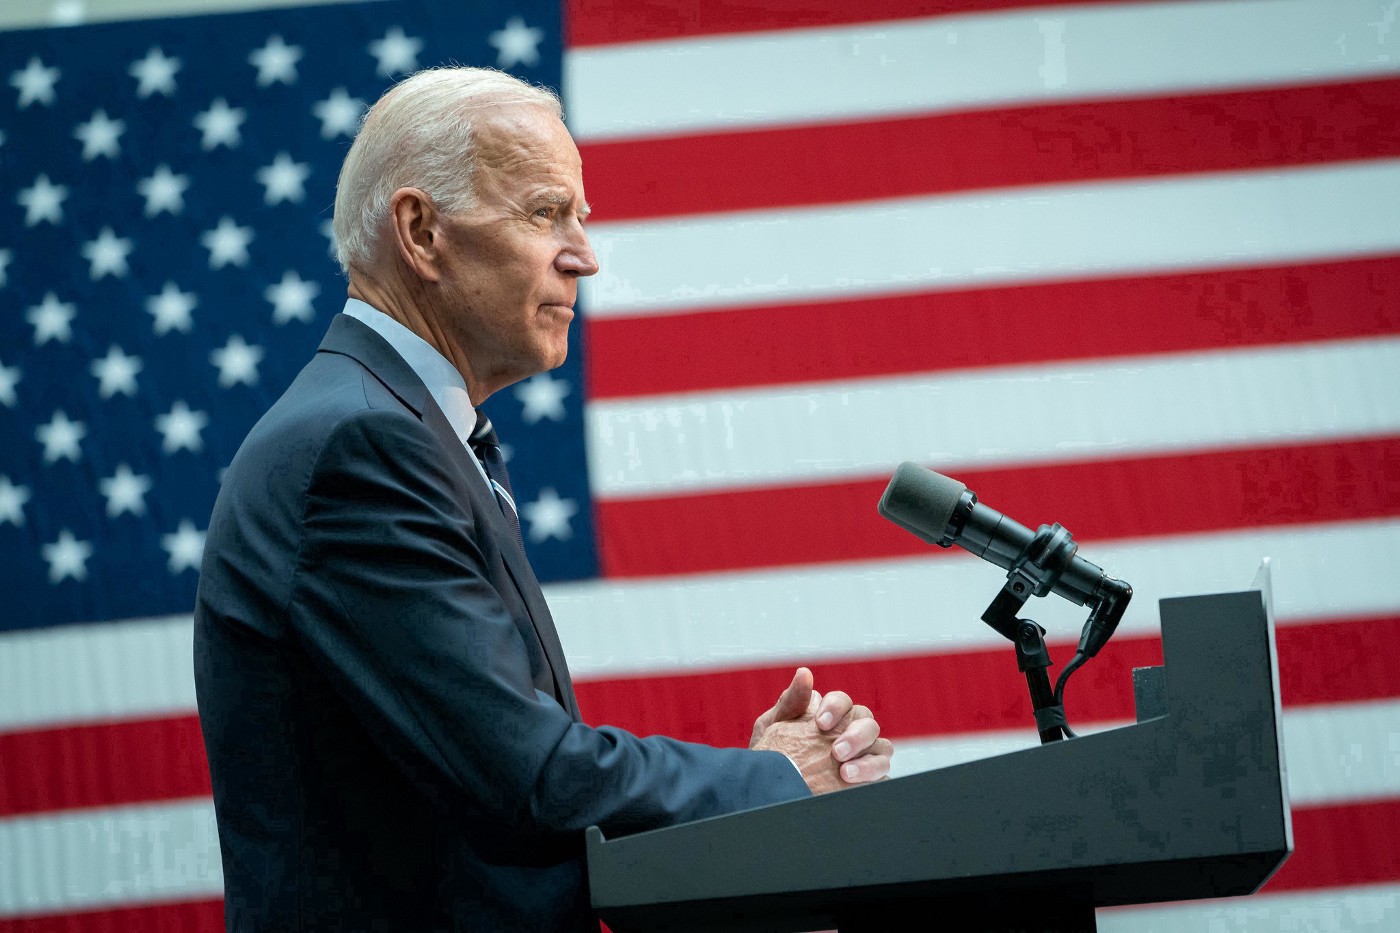 Joe Biden in profile standing at a podium in front of an American flag